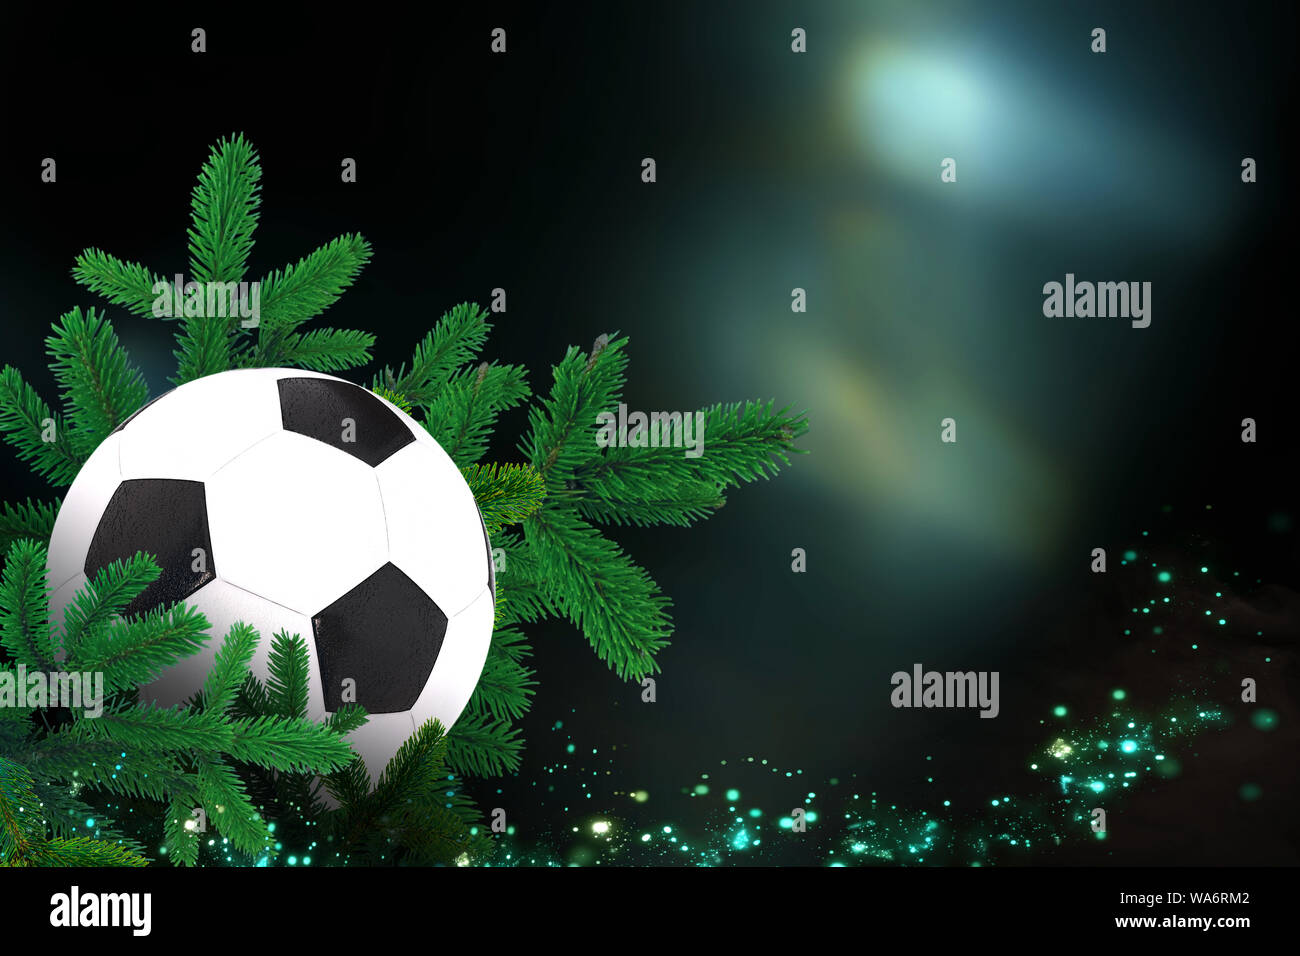 Soccer ball, Sports Christmas Card with festive decorations. Stock Photo